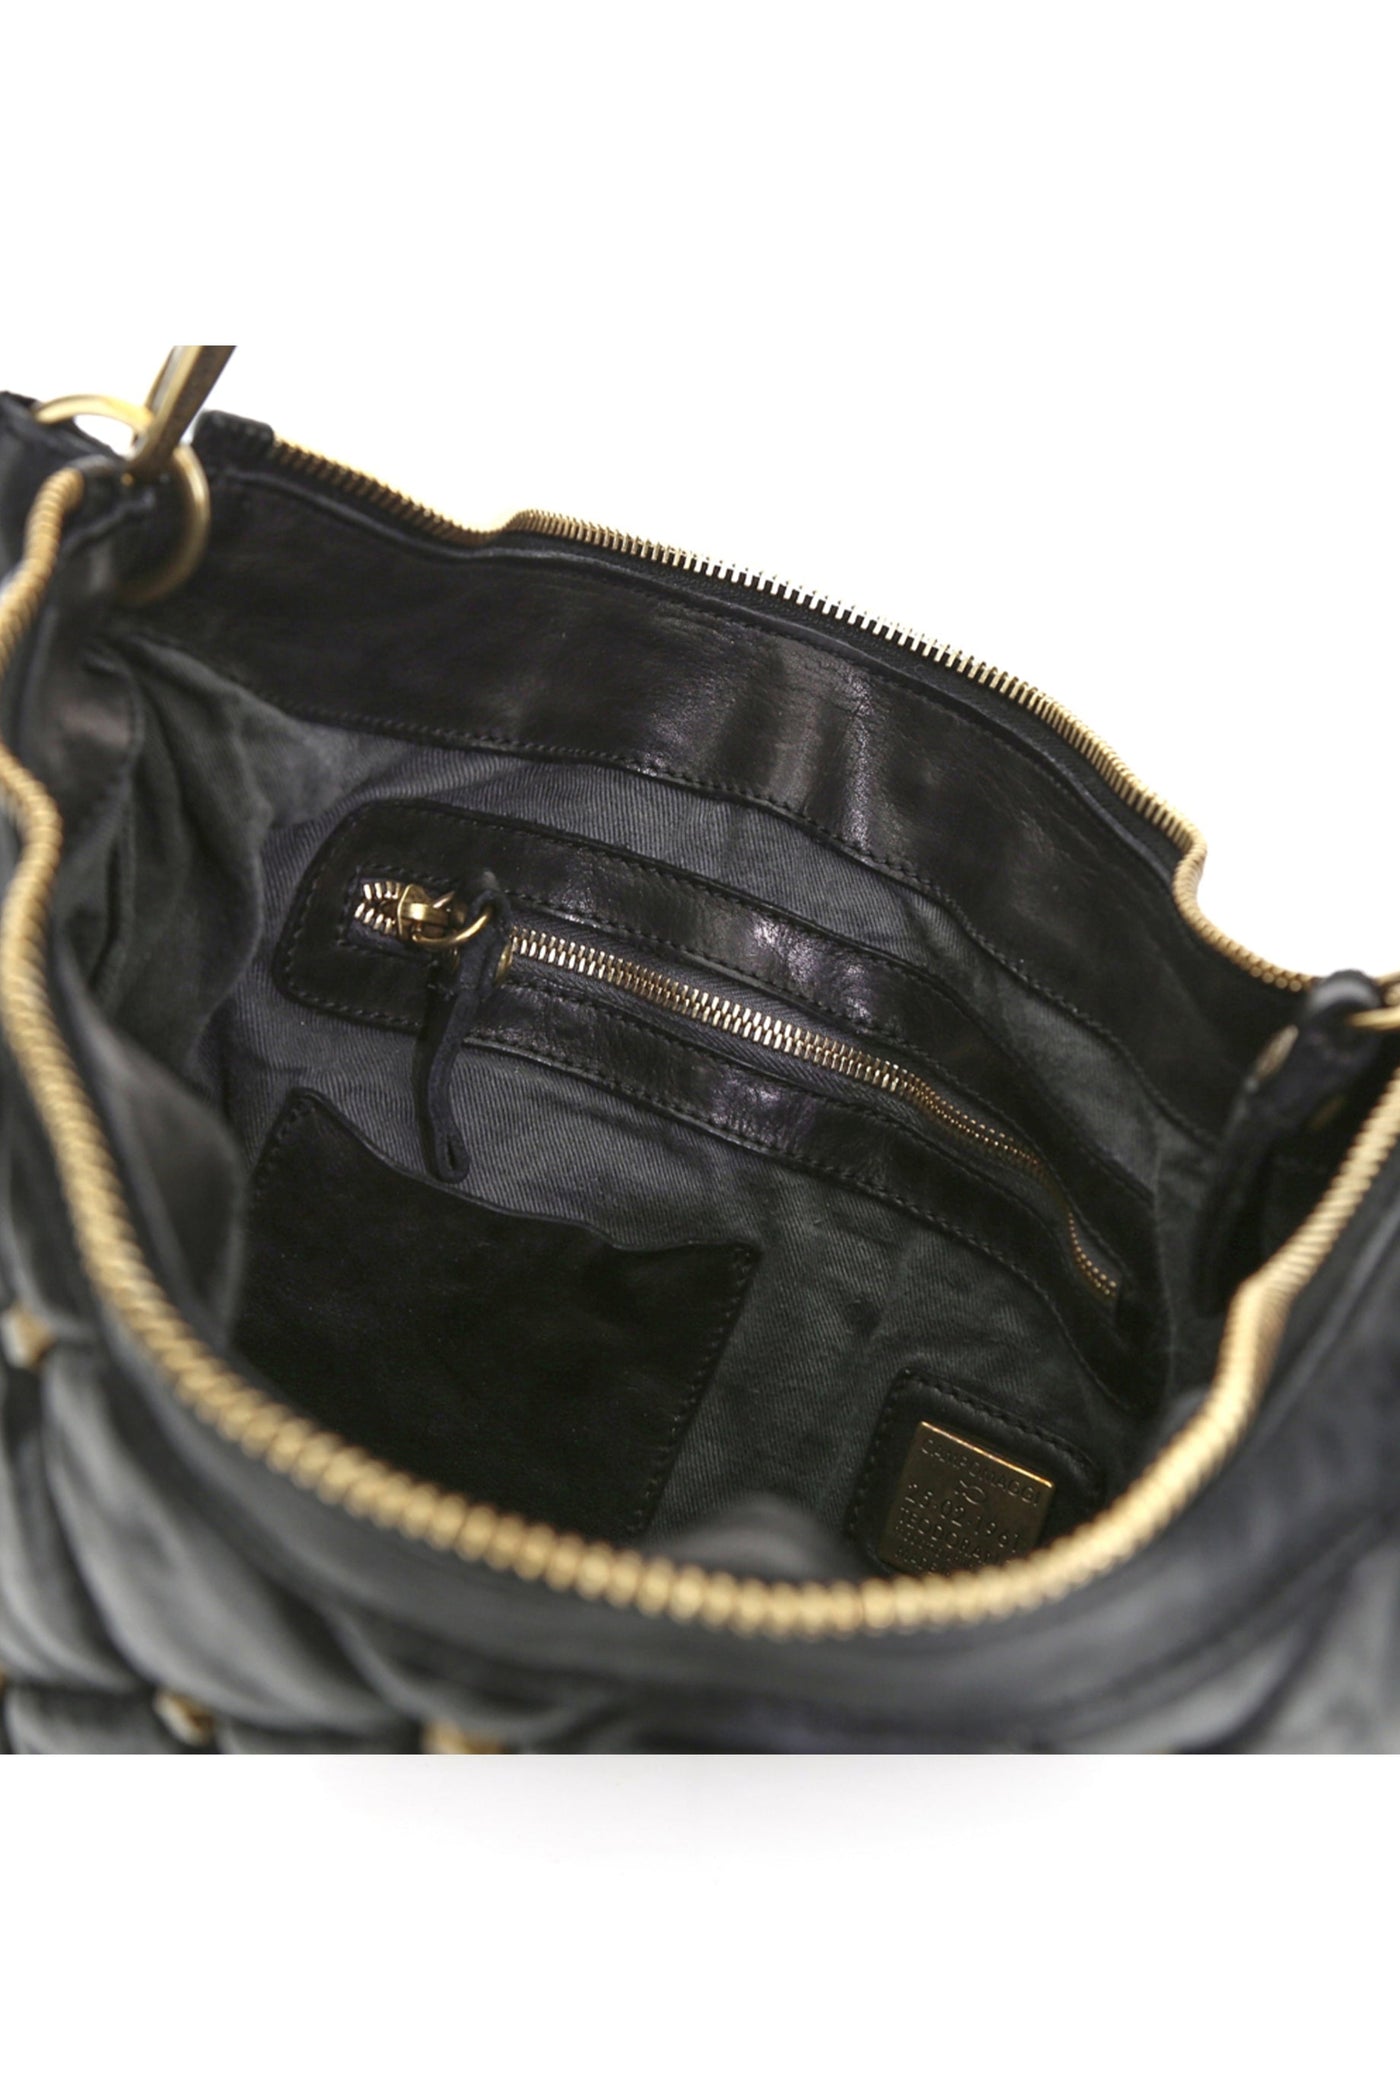 Campomaggi Quilted Bag - Black